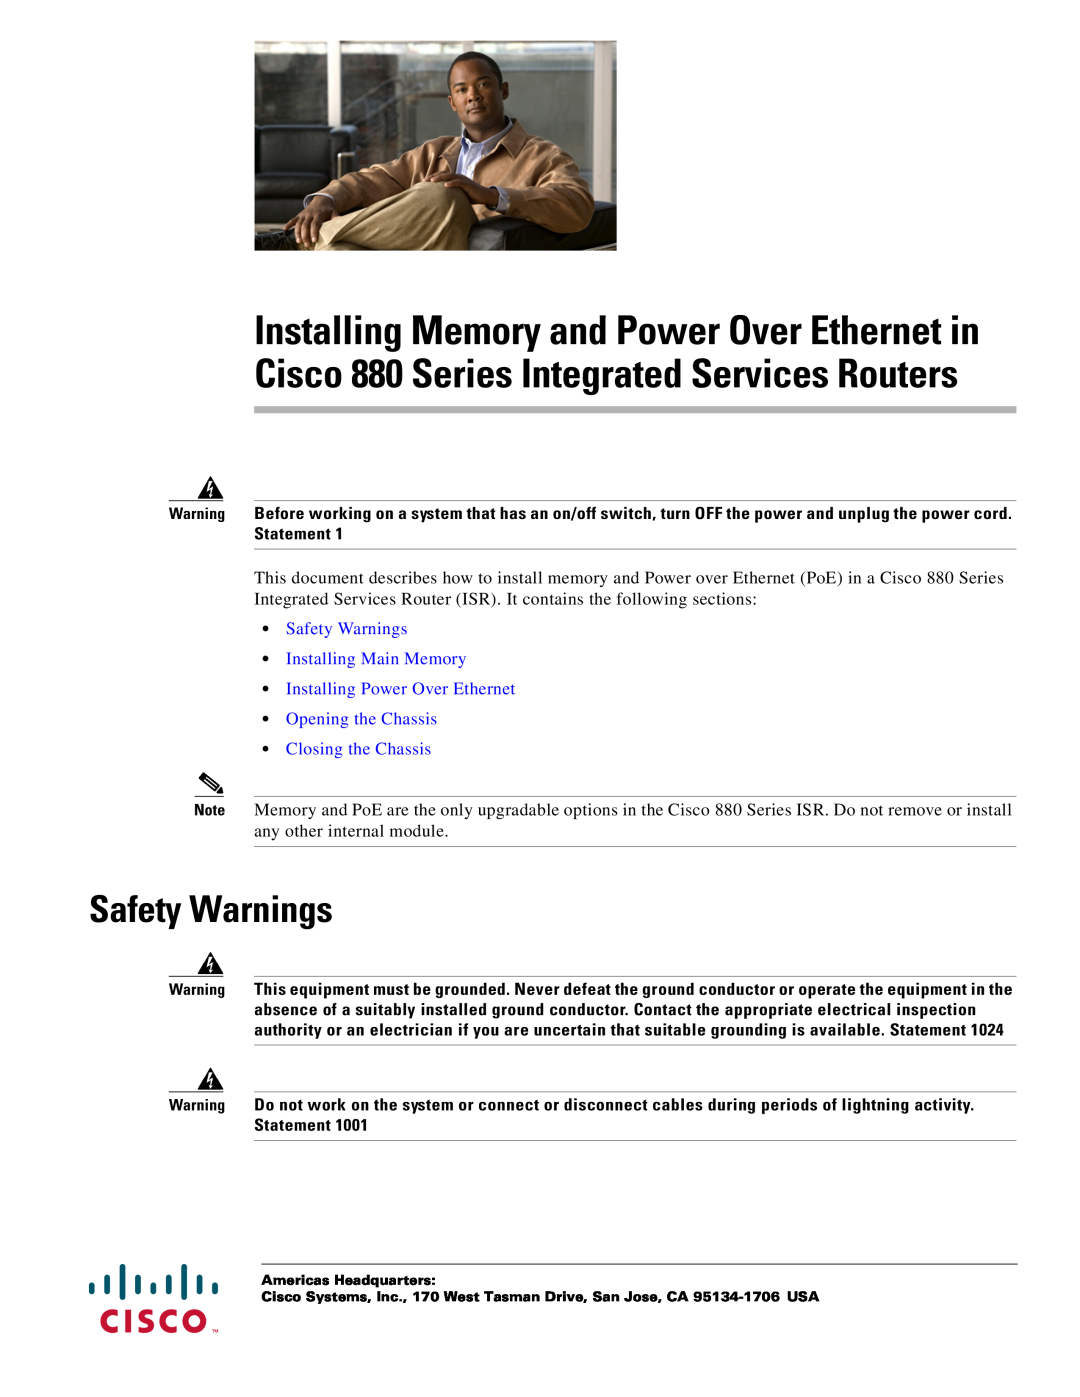 Cisco Systems 880 Series manual Safety Warnings Installing Main Memory Installing Power Over Ethernet 